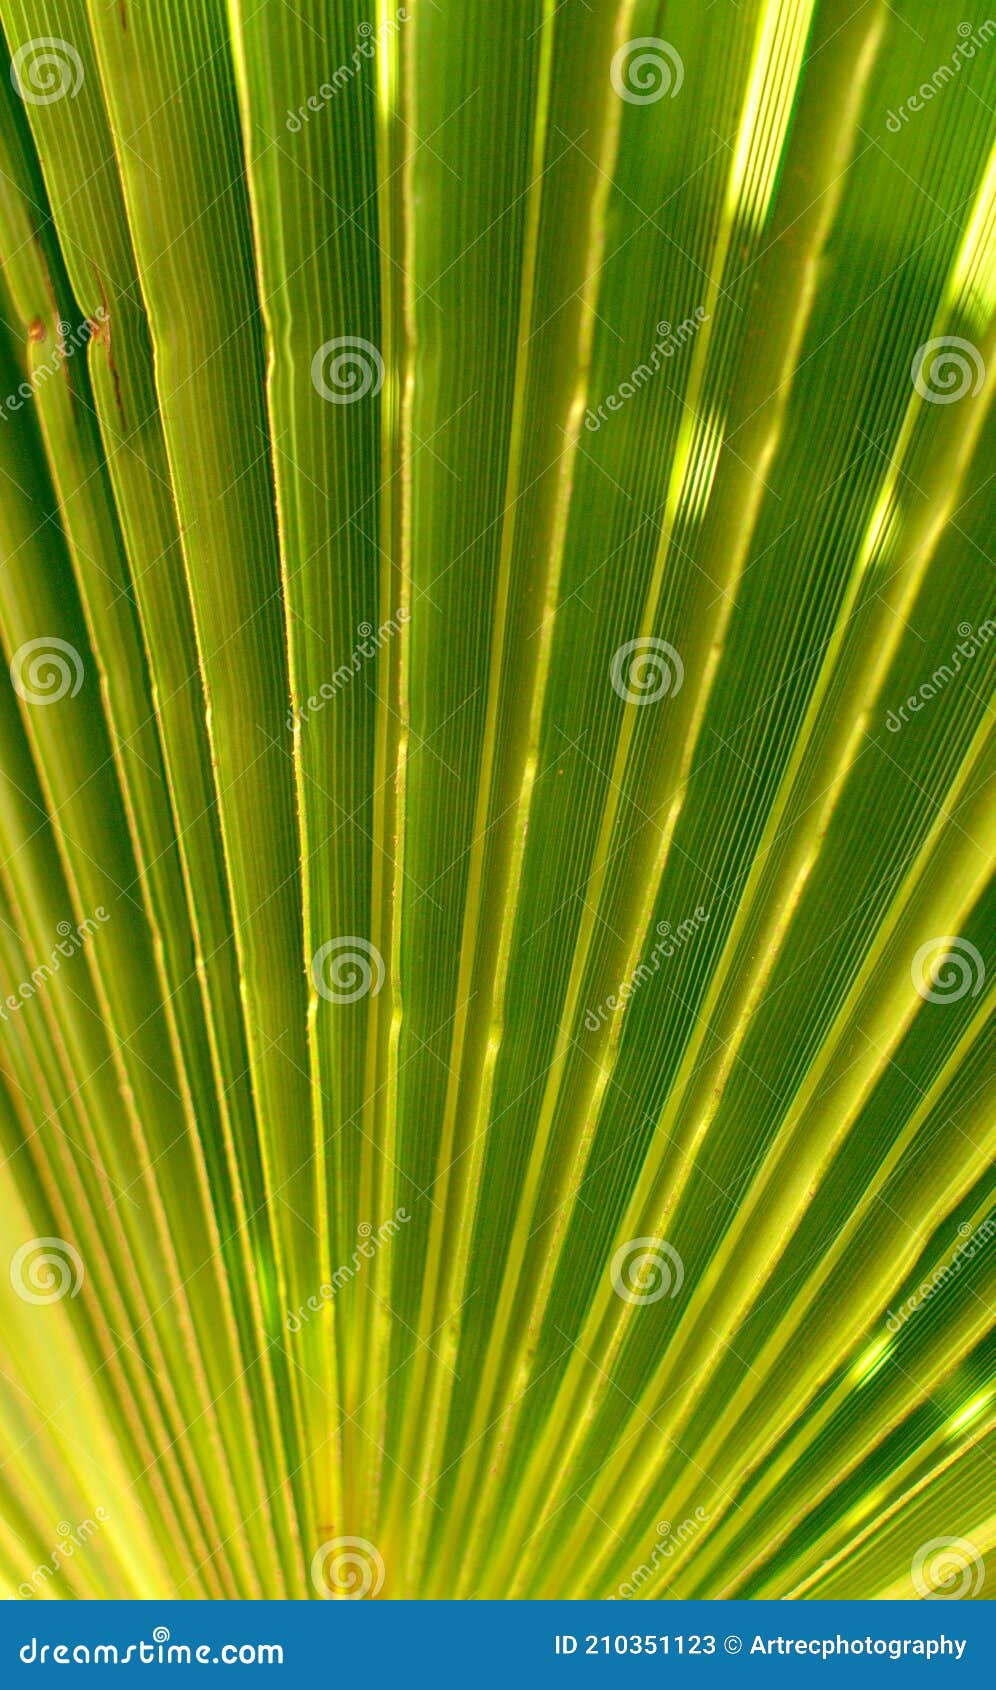 green palm tree close up background - gofre leaf wallpaper